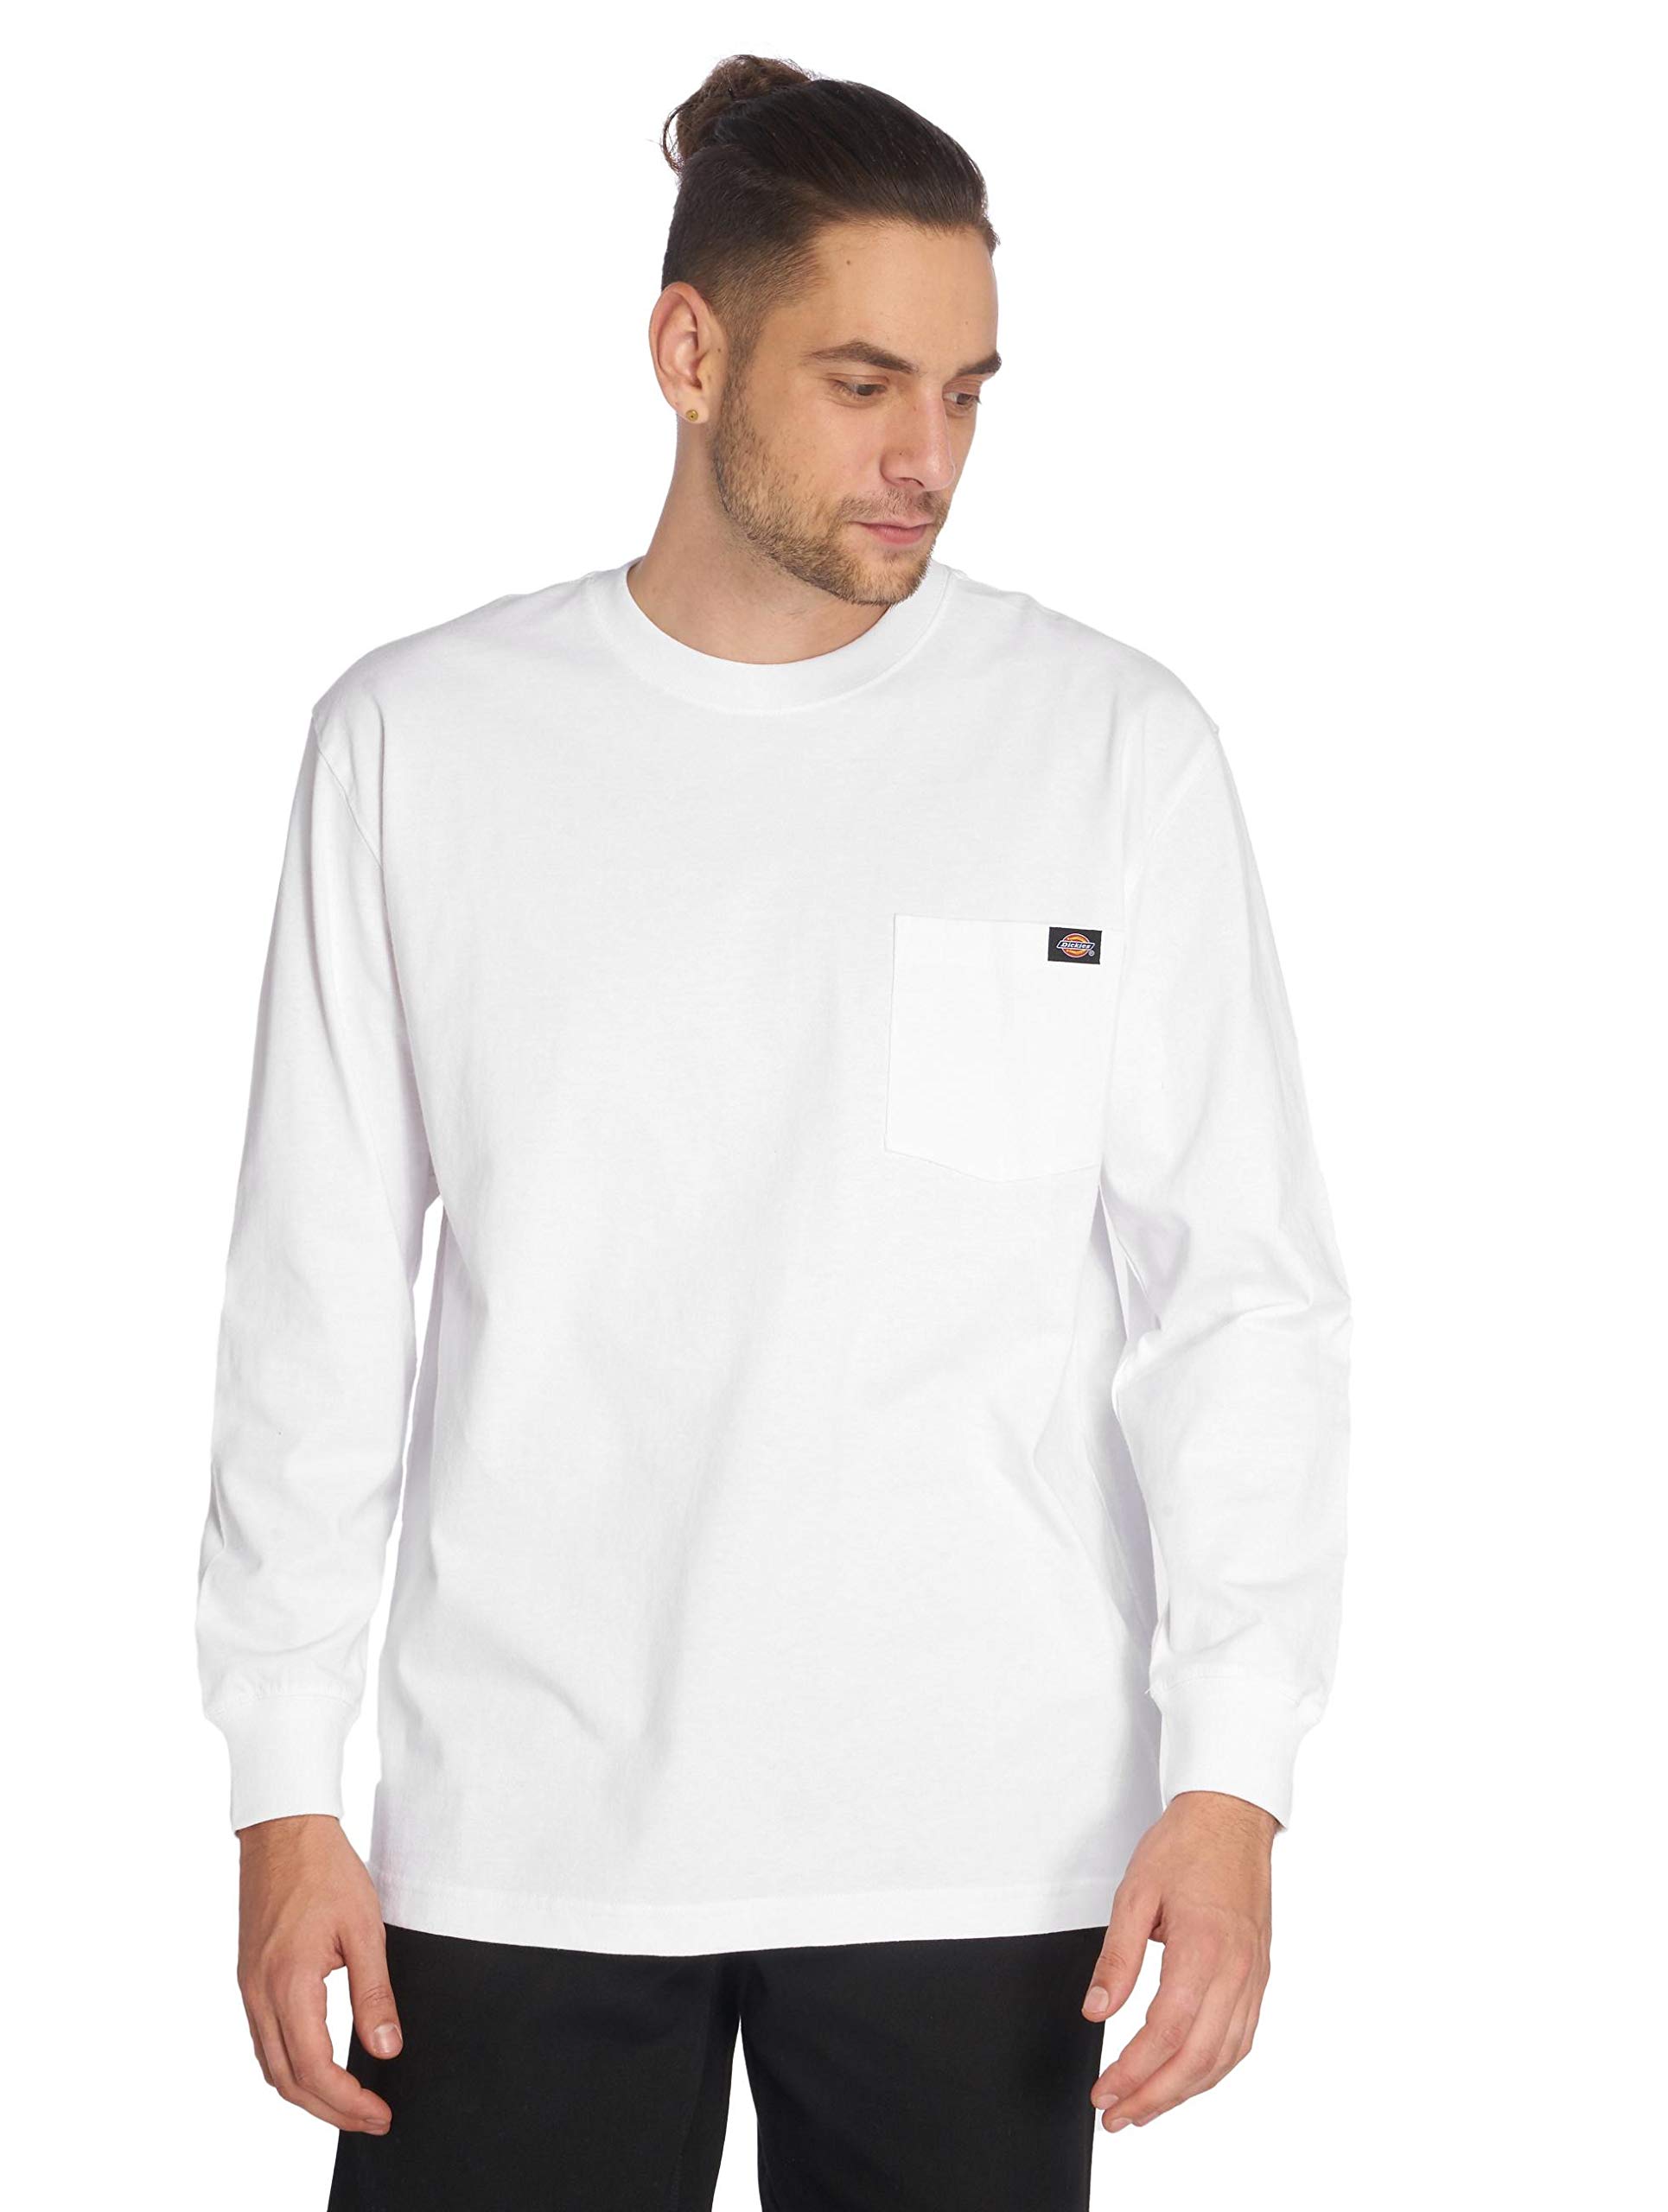 Dickies Men's Long Sleeve Heavyweight Crew Neck (White) $7.20 + Free Shipping w/ Prime or on $35+